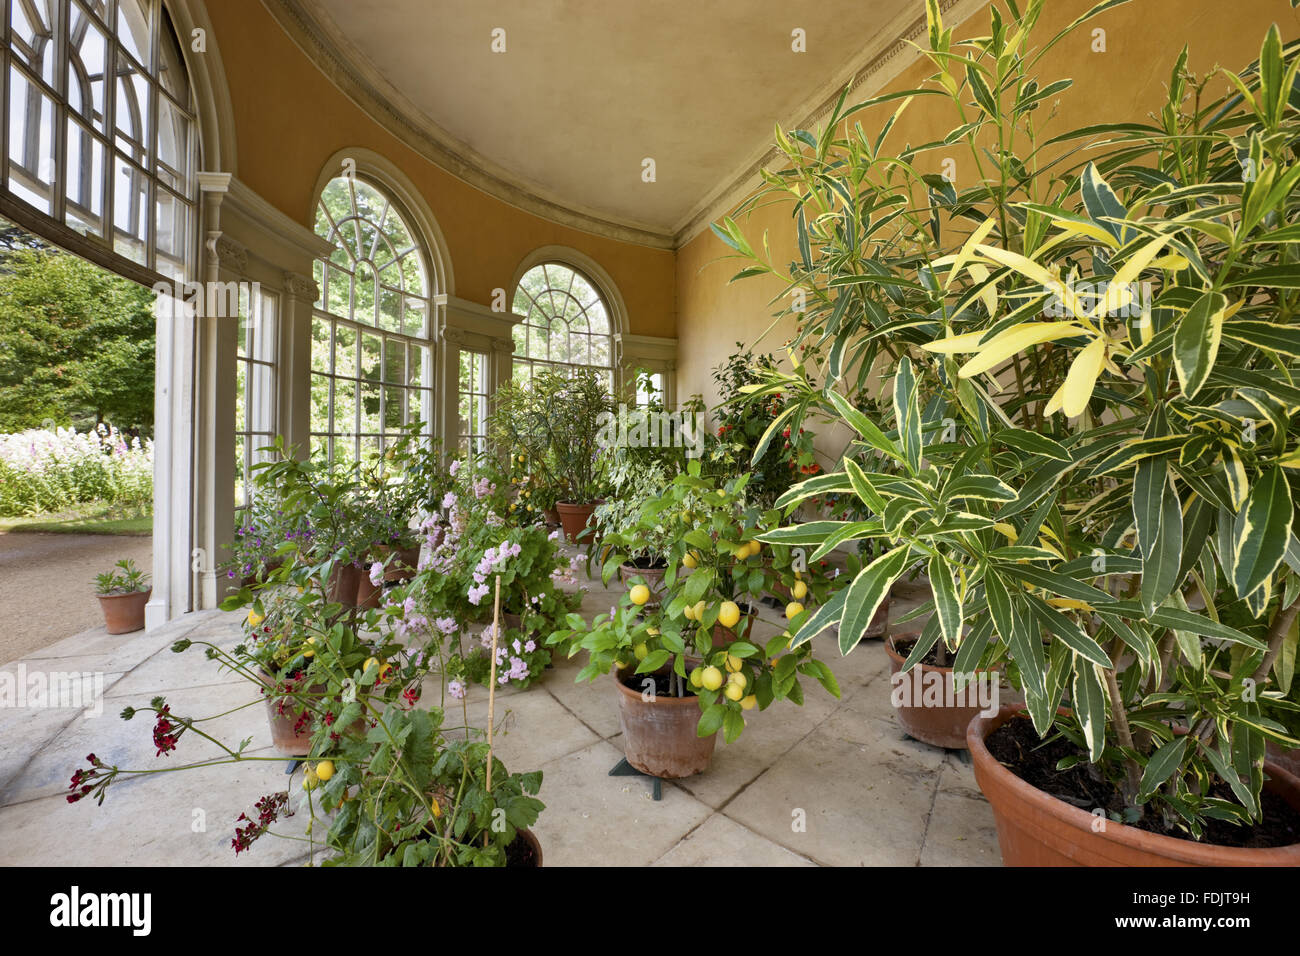 Inside the semicircular Garden House in the Pleasure Grounds at Osterley, Middlesex. The Garden House was built in 1780 during the Robert Adam remodelling of the house. Stock Photo